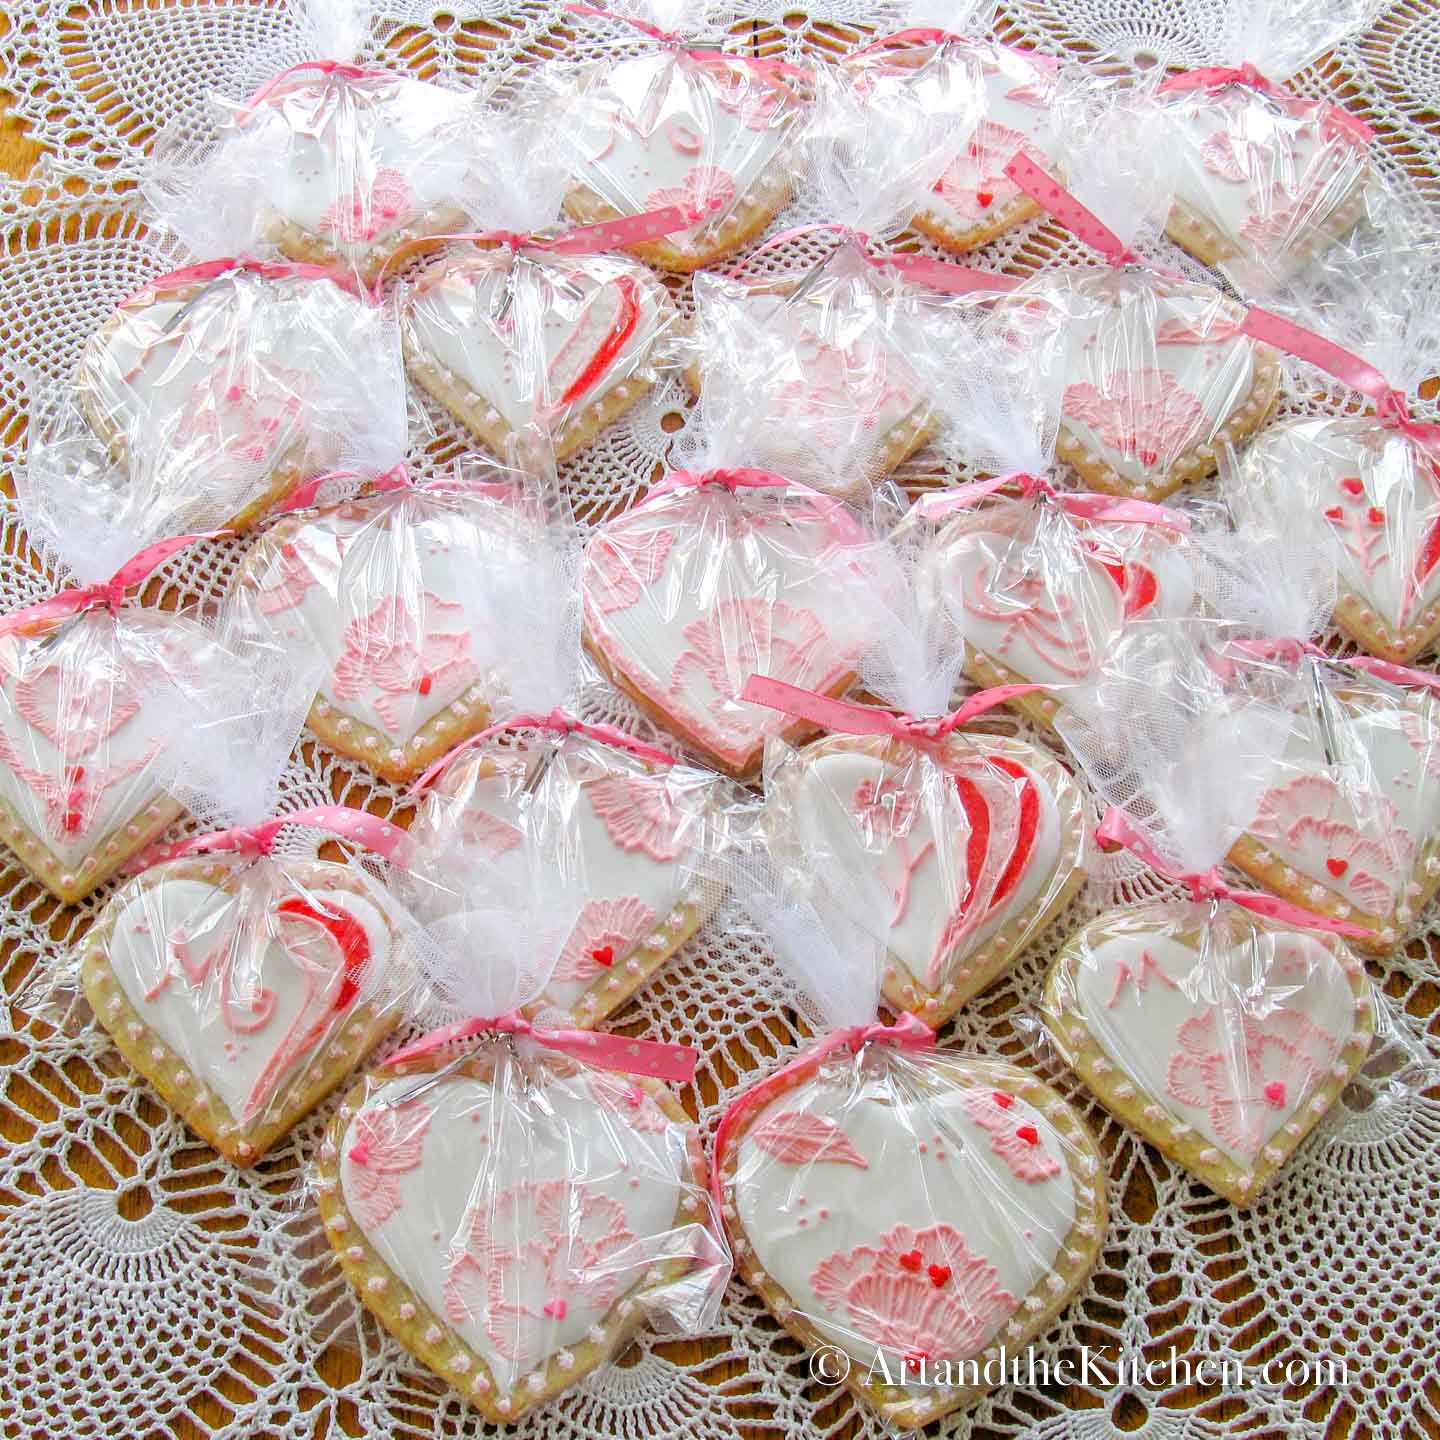 Heart shaped sugar cookies package in cellophane bags tied with pink ribbon.